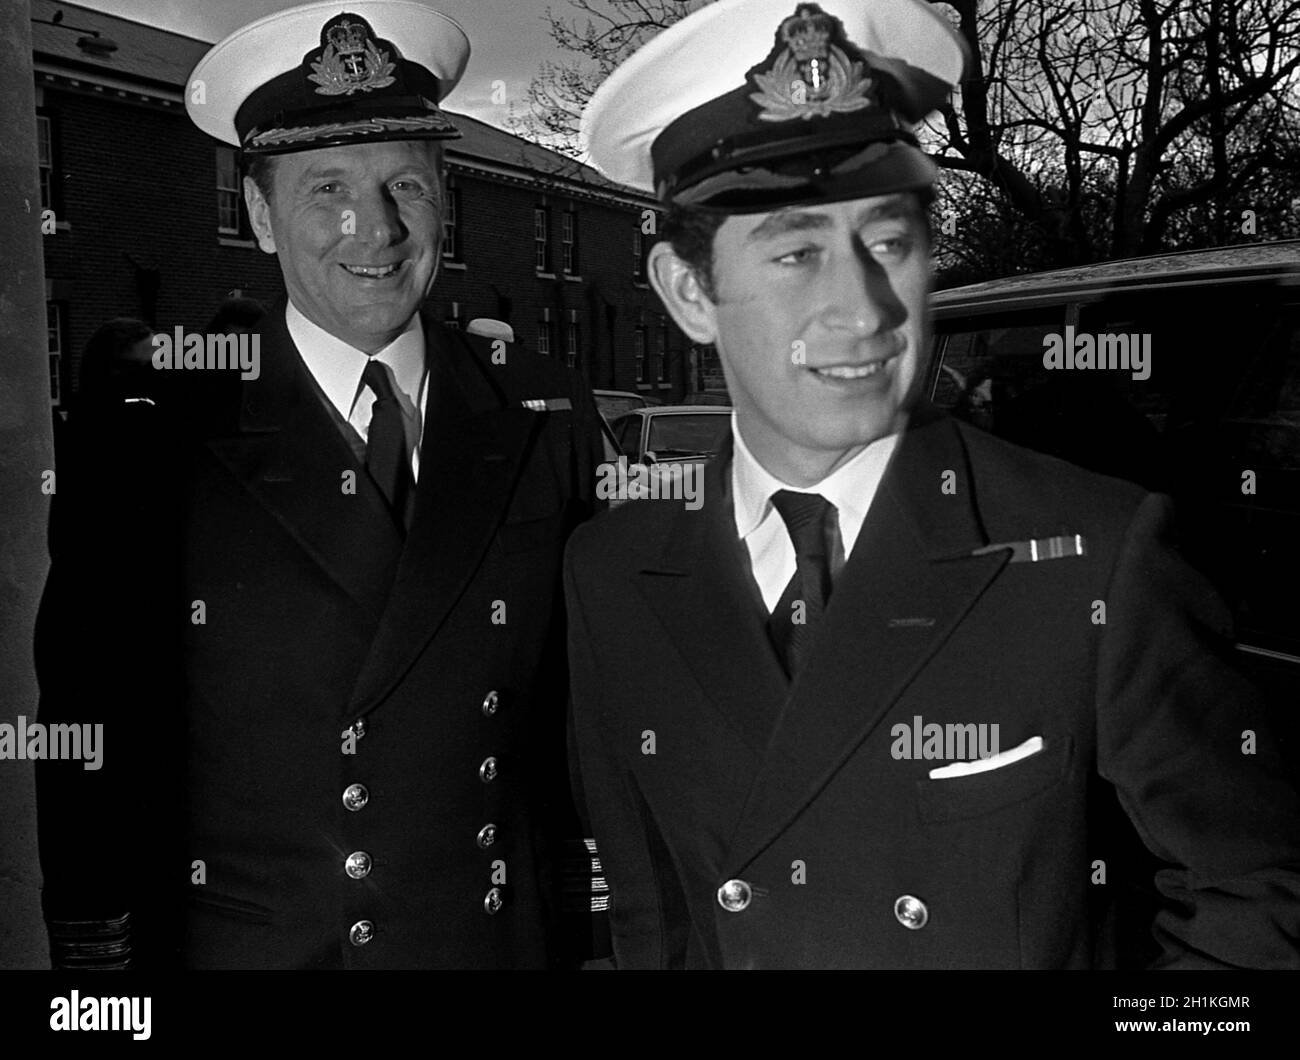 AJAXNETPHOTO. 12TH JANUARY, 1976. PORTSMOUTH, ENGLAND, - PRINCE STARTS COURSE - HRH PRINCE CHARLES IN ROYAL NAVY UNIFORM ARRIVING AT HMS VERNON TO BEGIN A 4 WEEK COMMANDING OFFICER TRAINING COURSE IS WELCOMED BY BASE COMMANDING OFFICER CAPTAIN G.TRISTE RN (LEFT). PHOTO;JONATHAN EASTLAND/AJAX REF:761201 18A Stock Photo